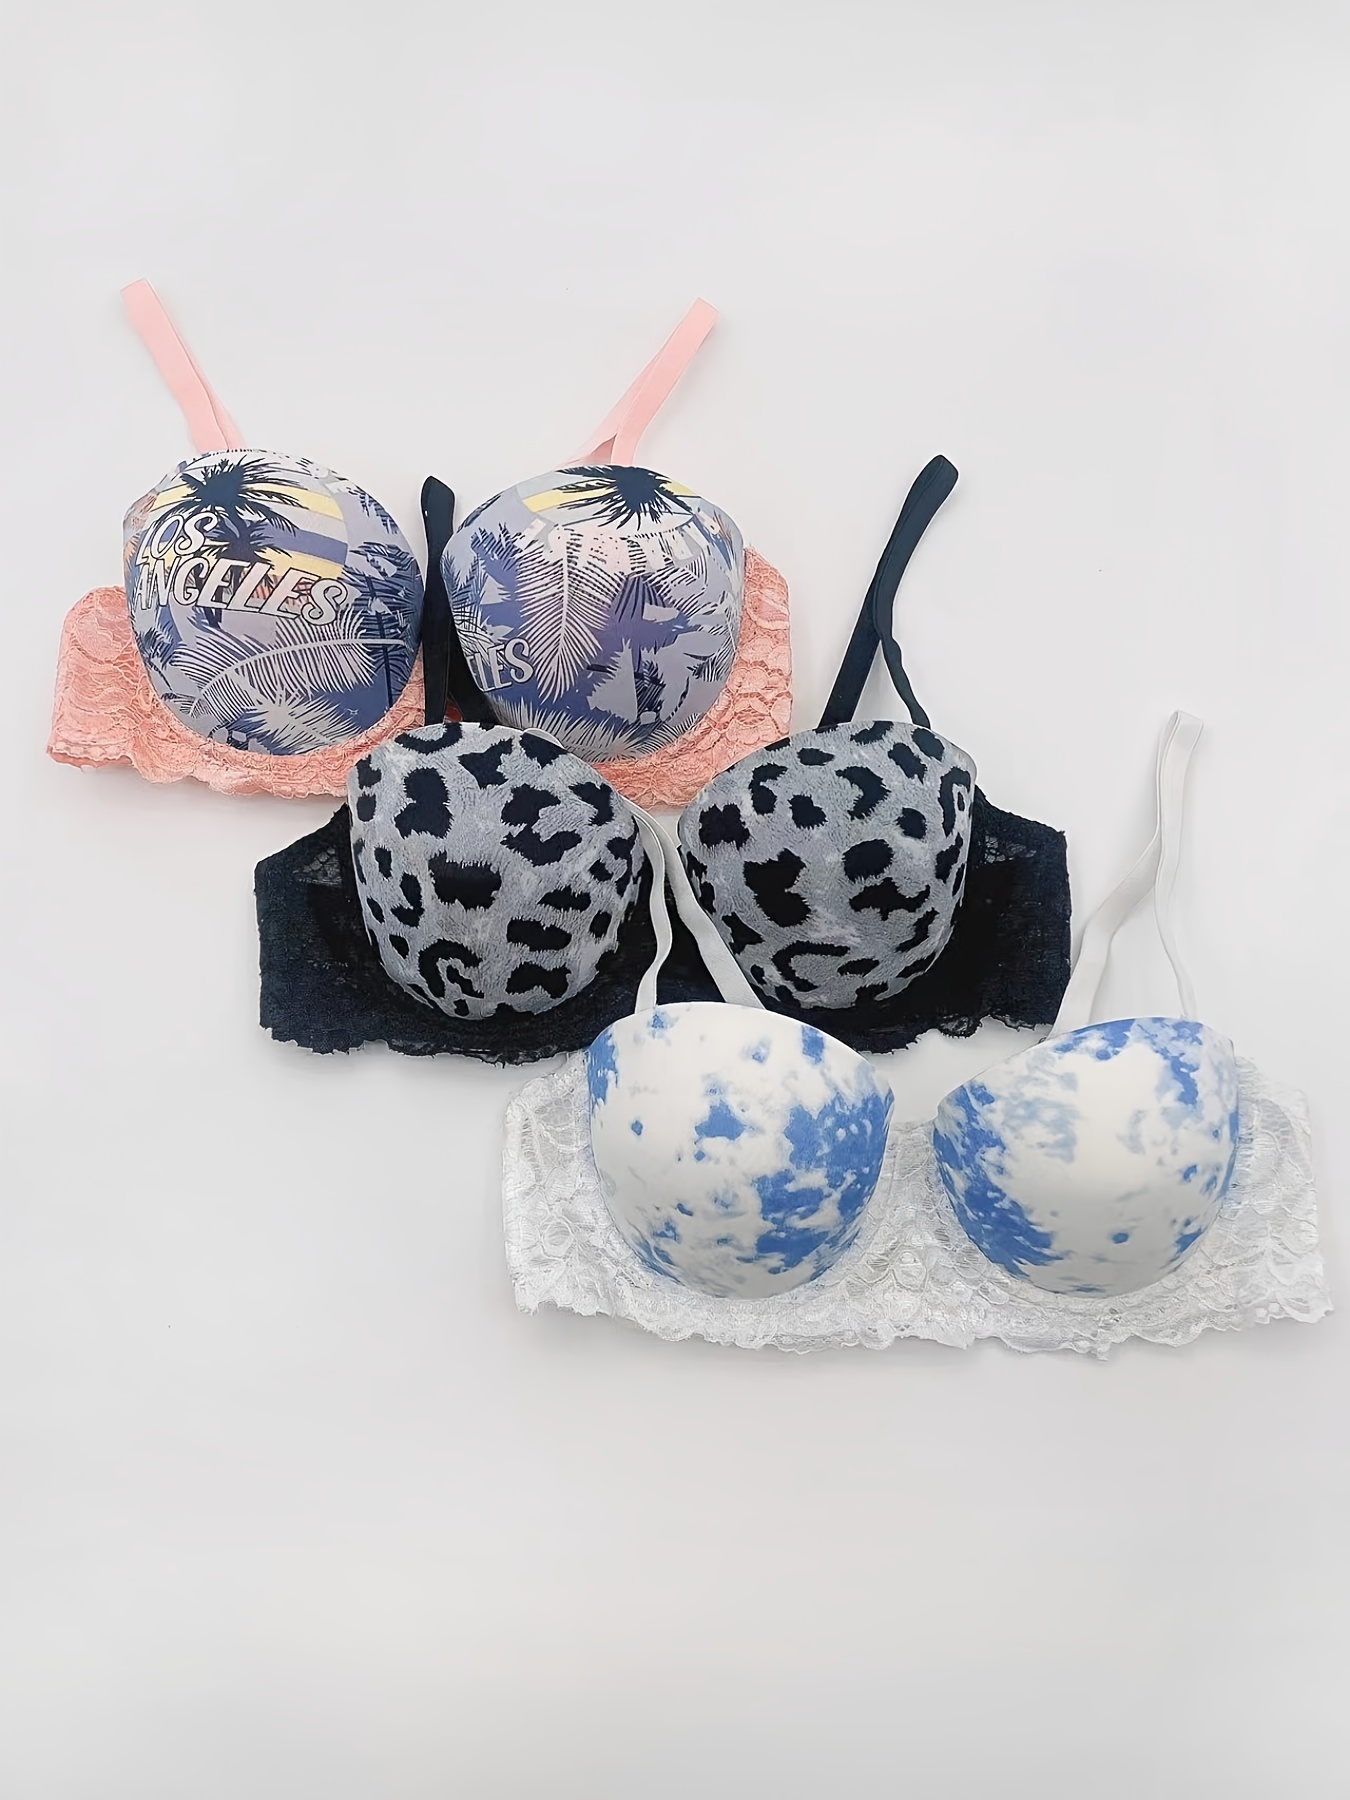 Bras for Women Padded Womens Shoulder Strap Bra Half Cup Lace Thin